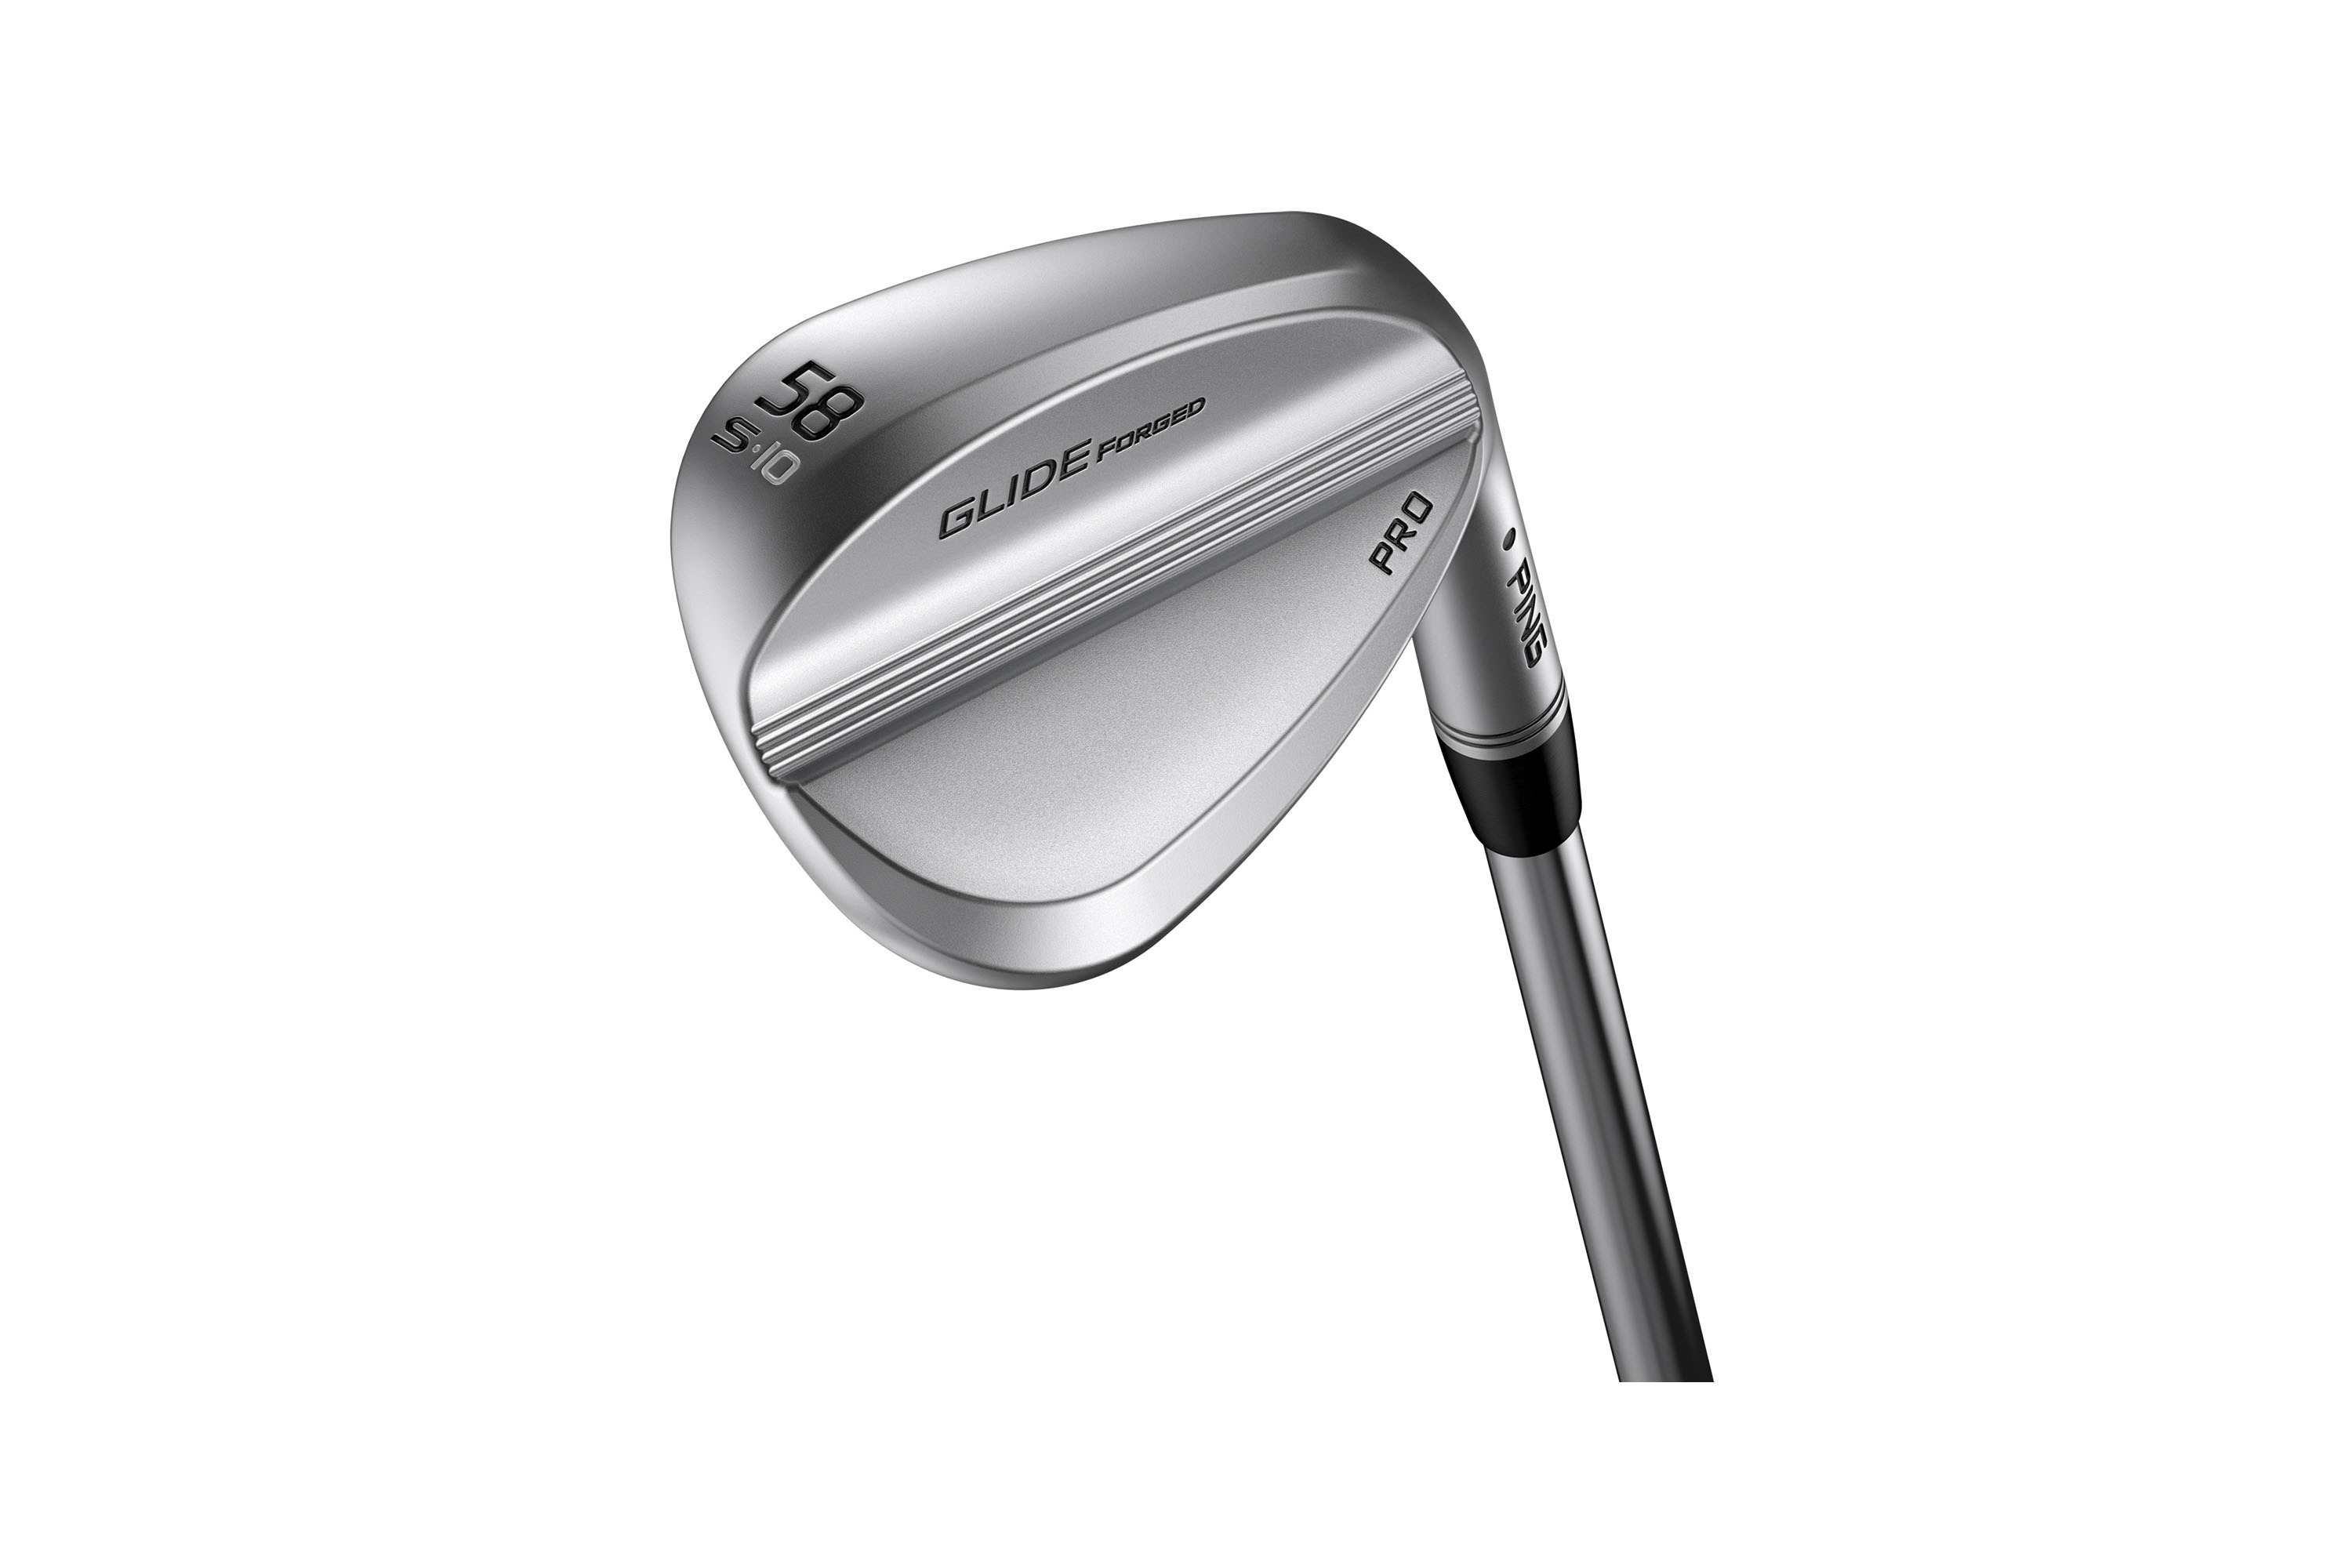 How Ping was able to get more spin with its Glide Forged Pro